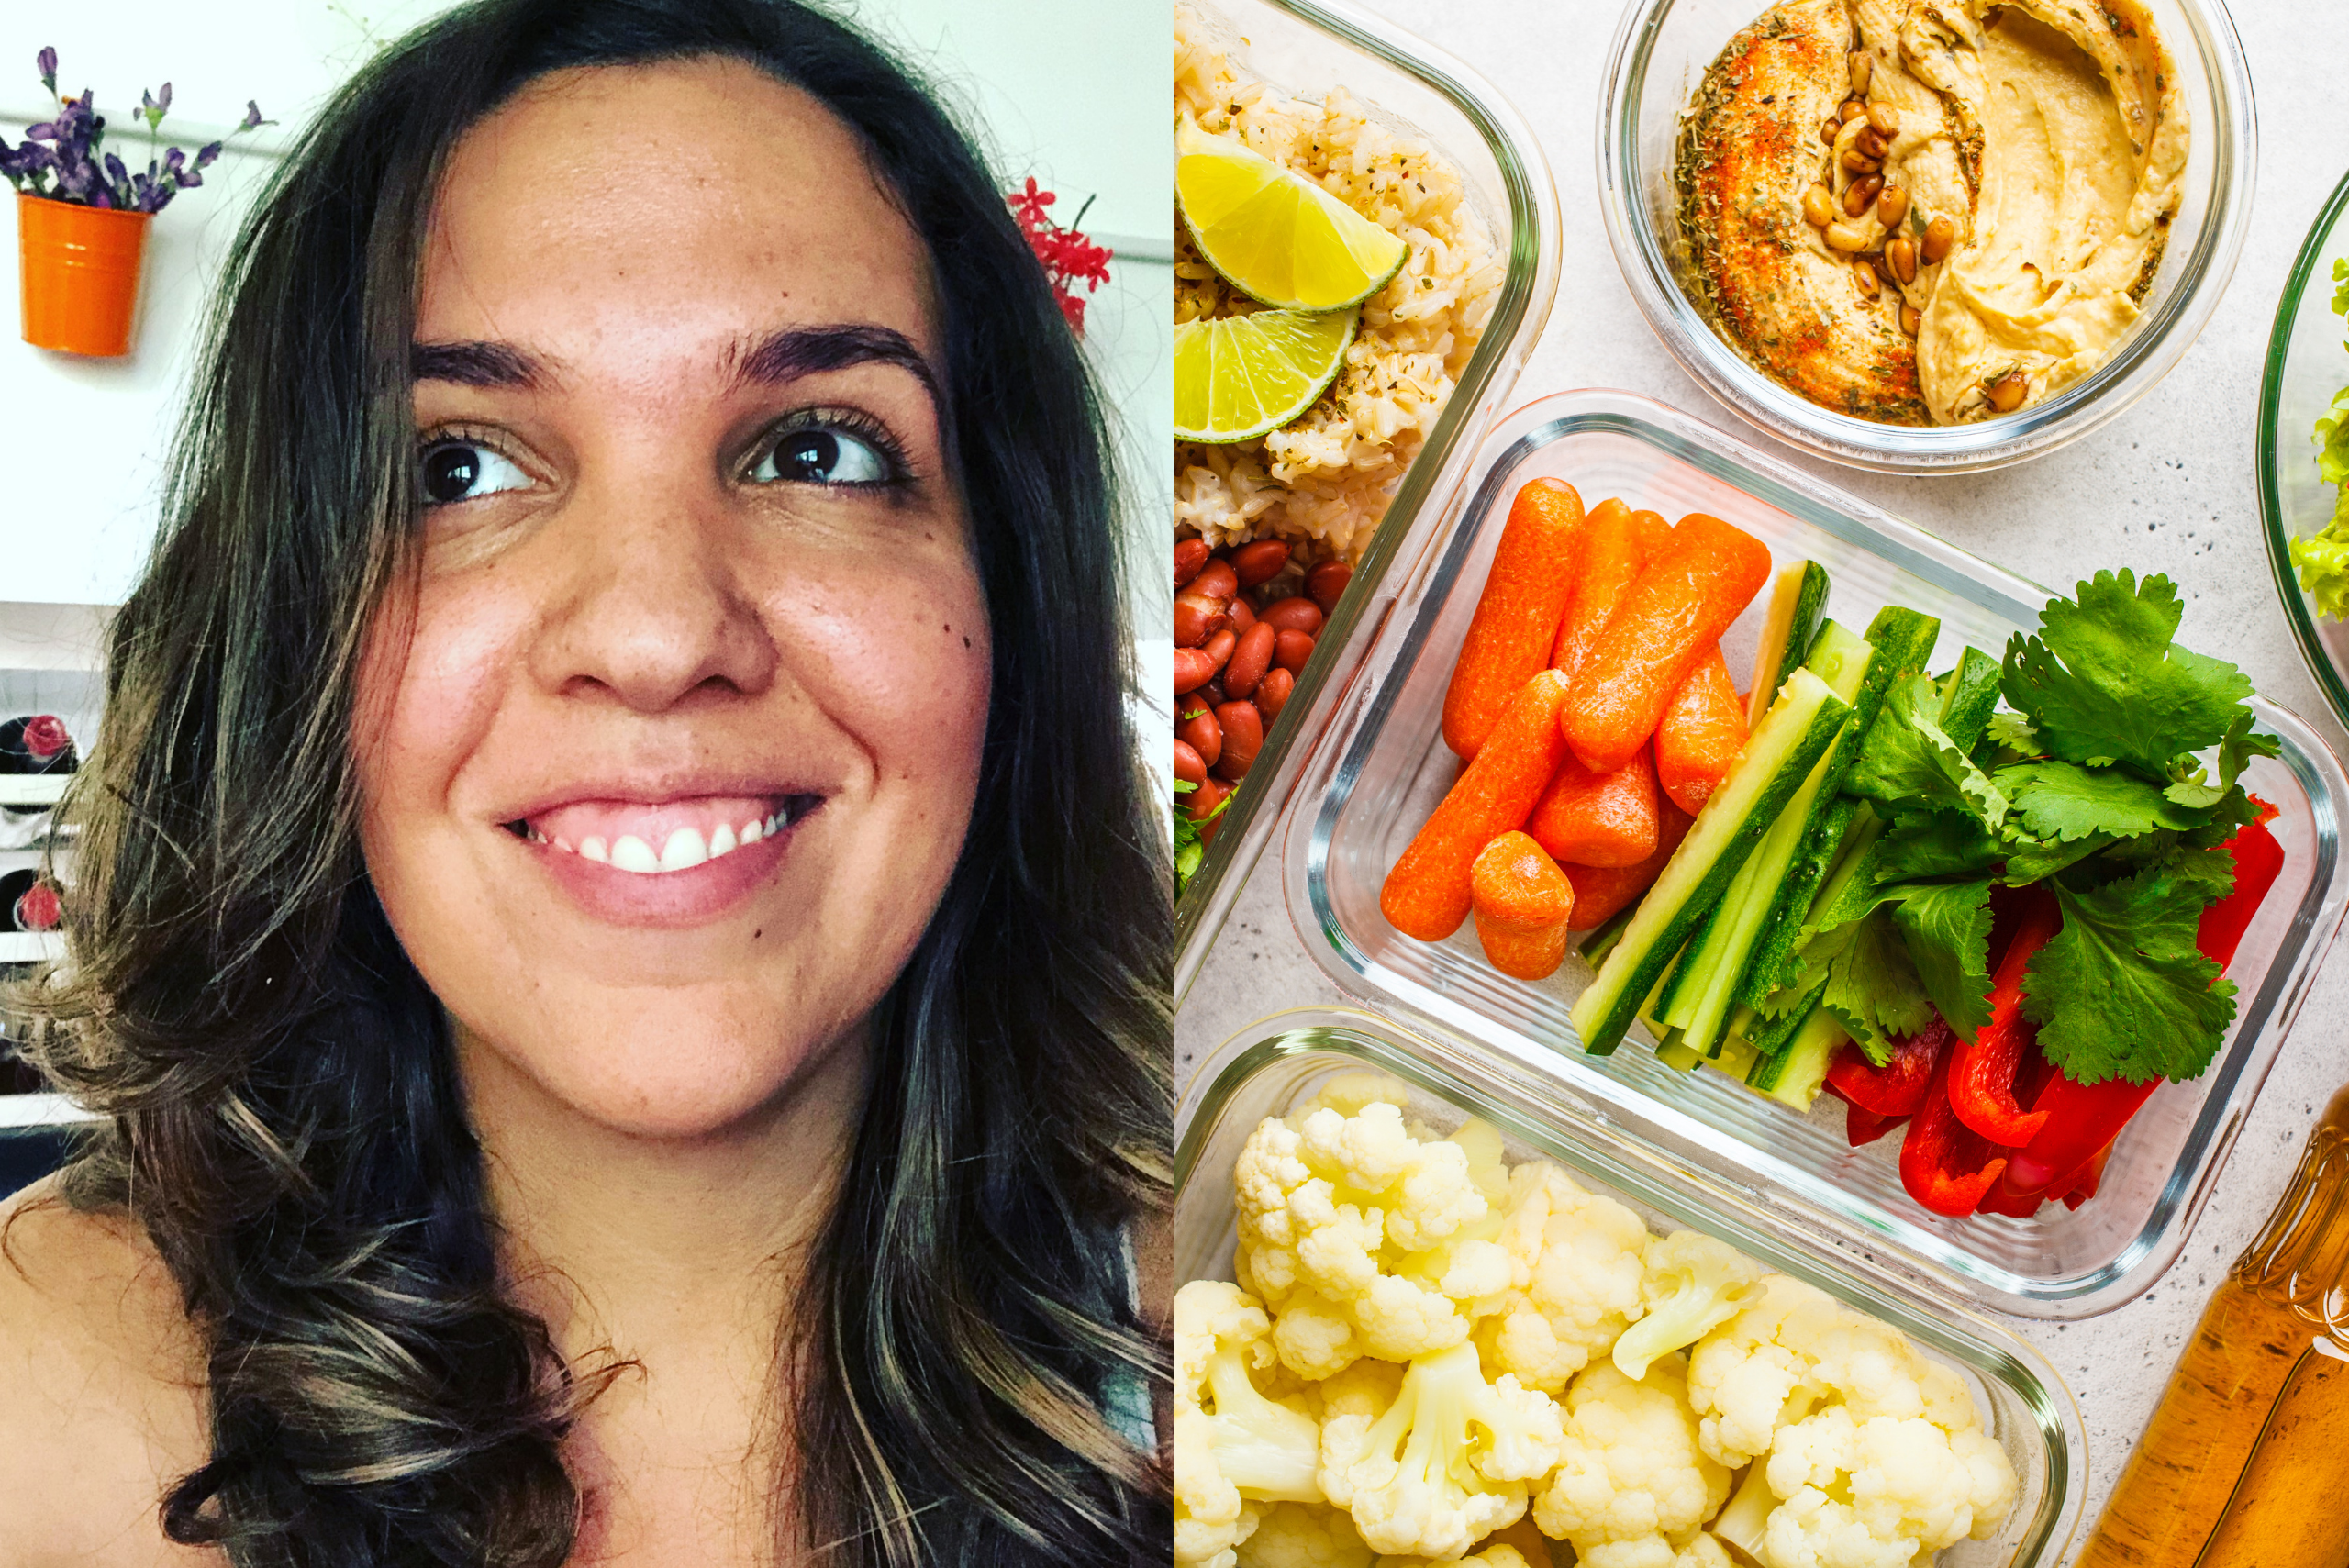 How & Why I Went Plant-Based